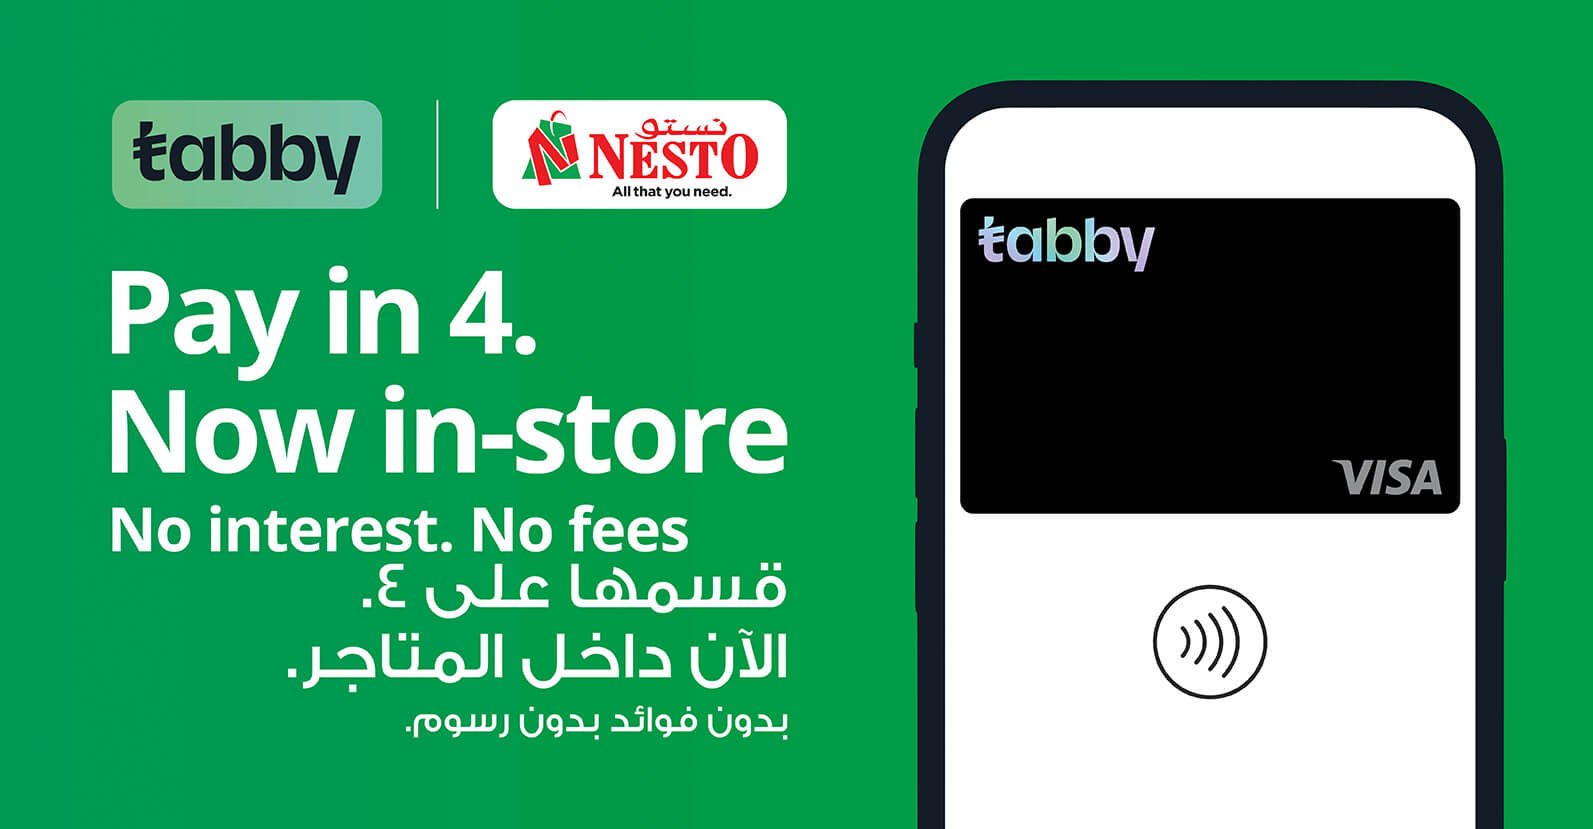 Nesto Partners with Tabby to Offer Convenient “Pay in 4” Option